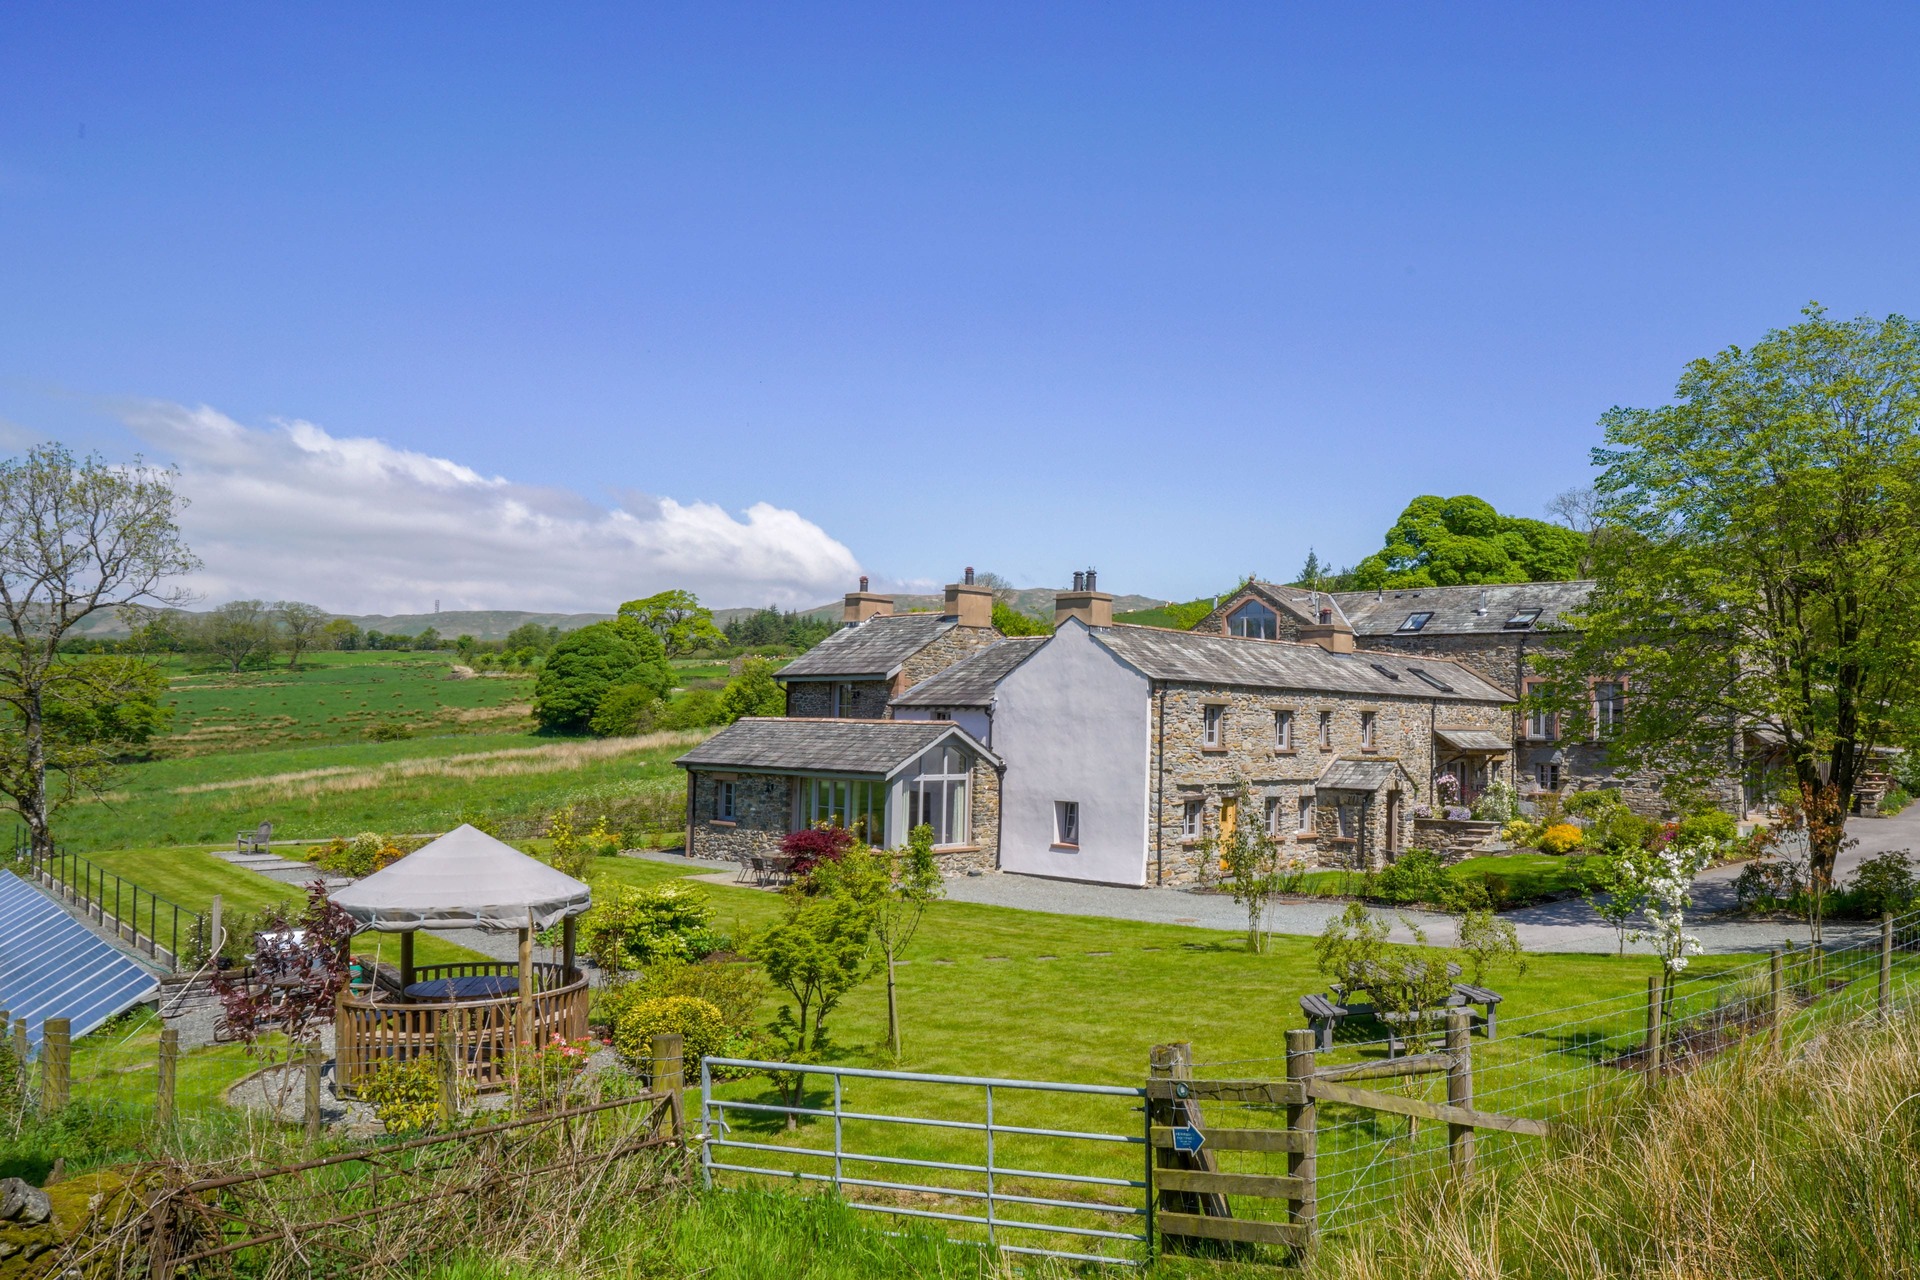 Holiday cottages in the Cumbrian countryside on a sunny day